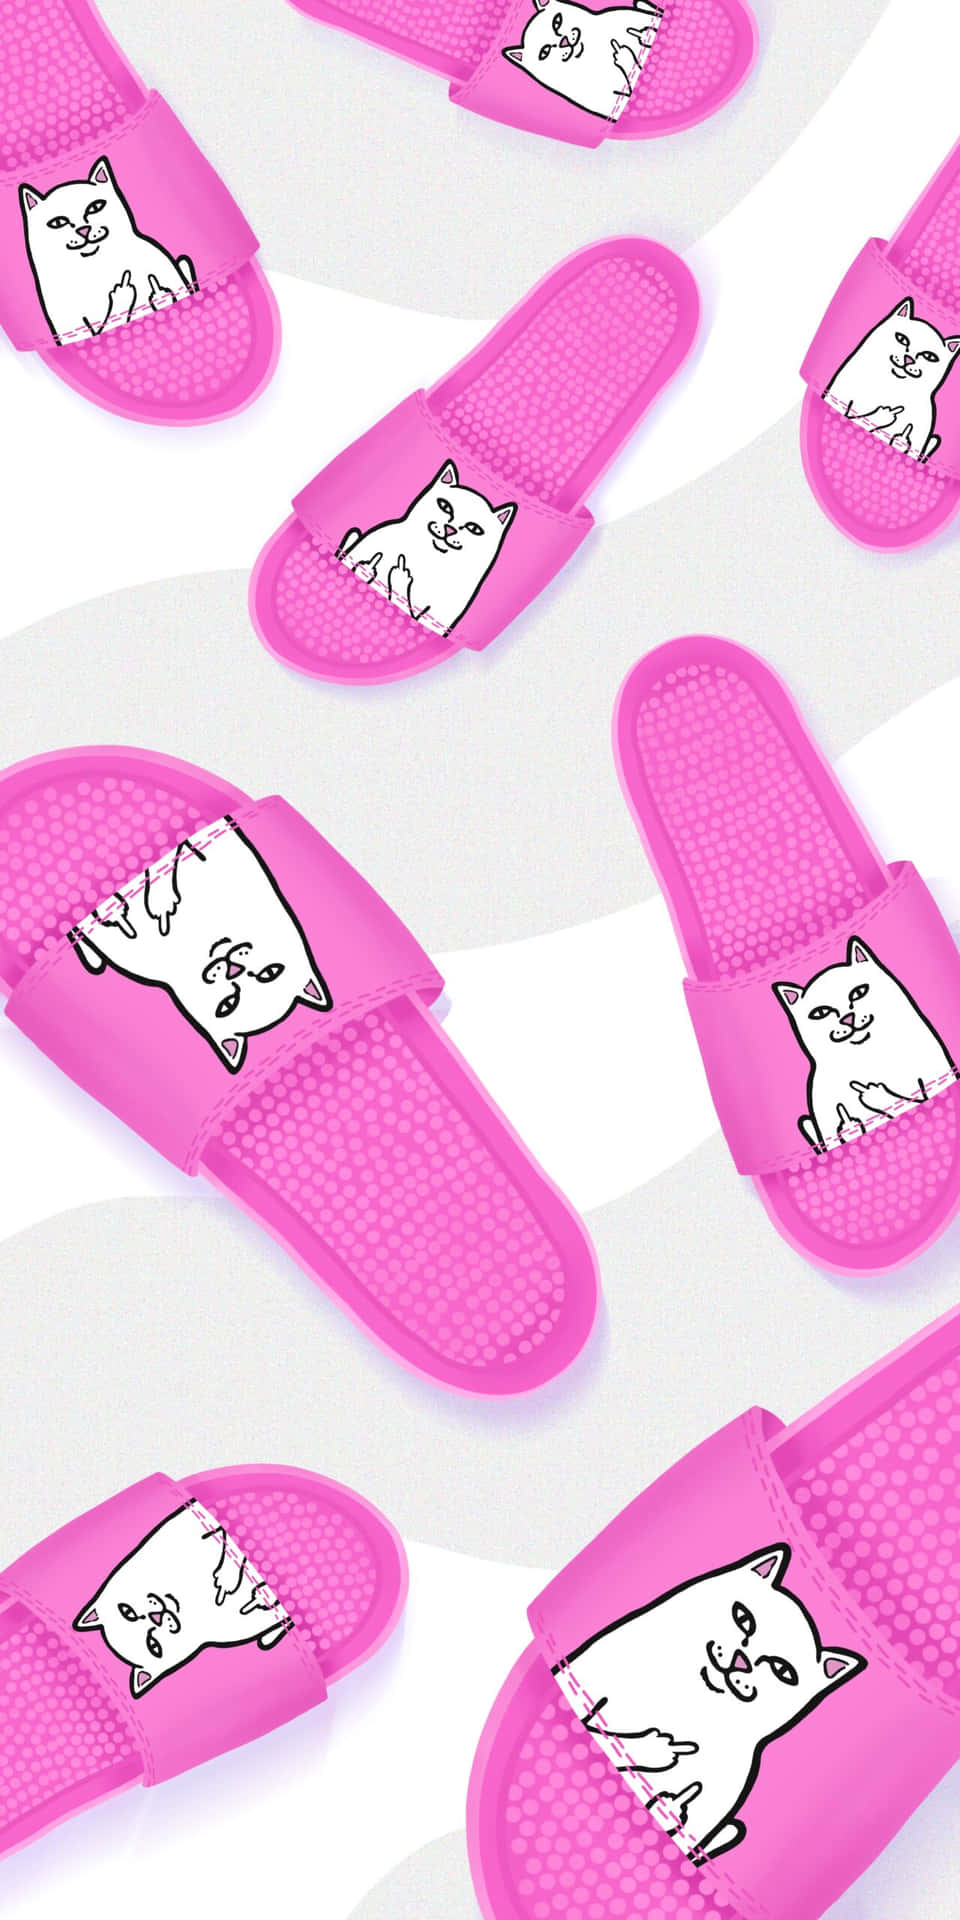 Skate, slide, and style the streets with Ripndip! Wallpaper